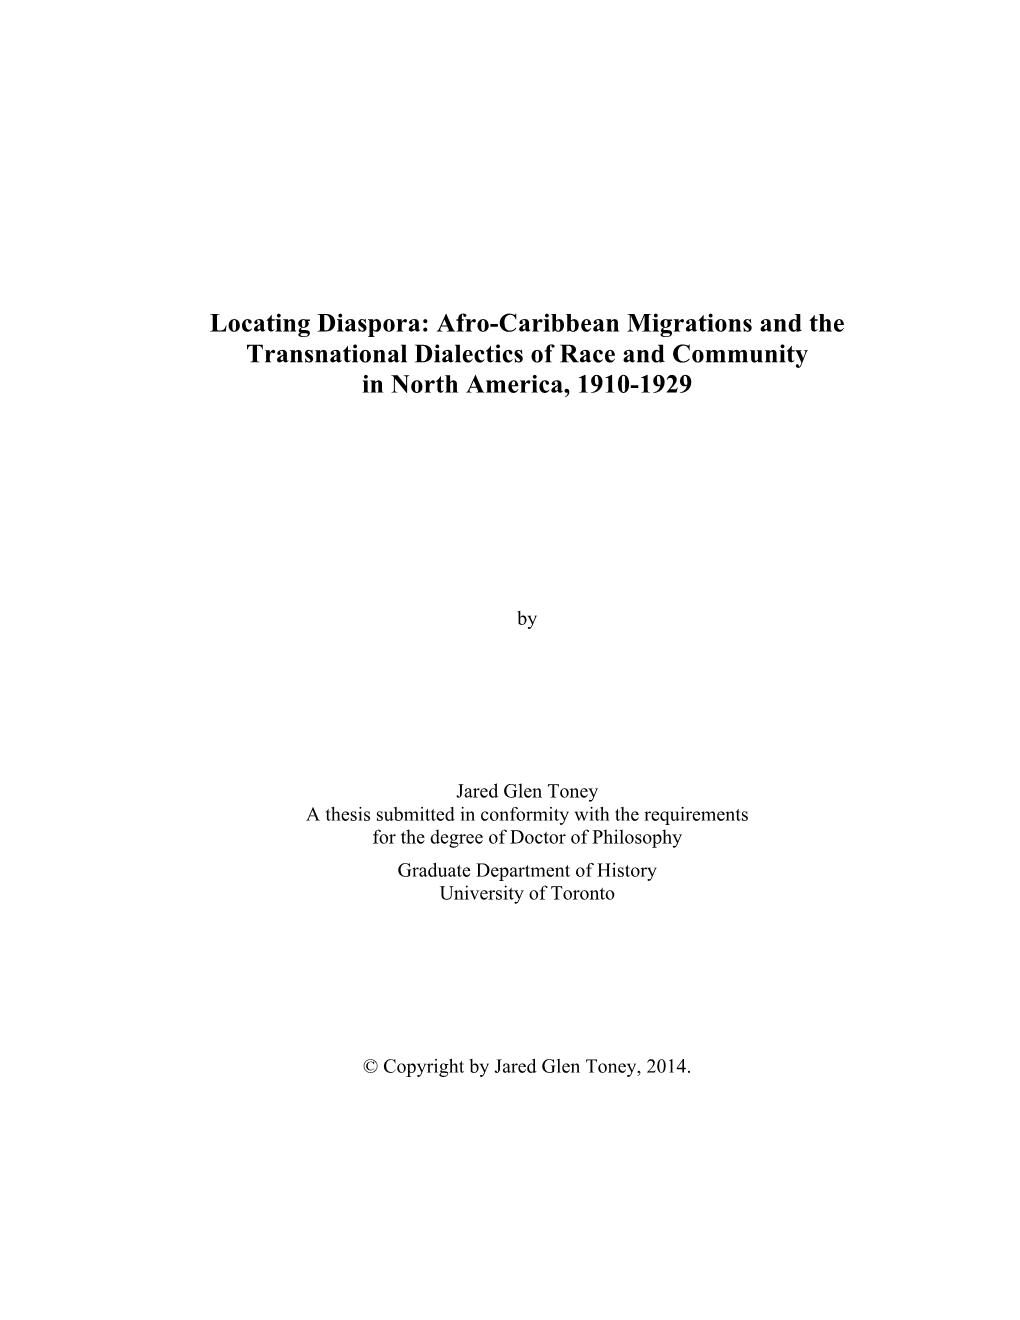 Locating Diaspora: Afro-Caribbean Migrations and the Transnational Dialectics of Race and Community in North America, 1910-1929